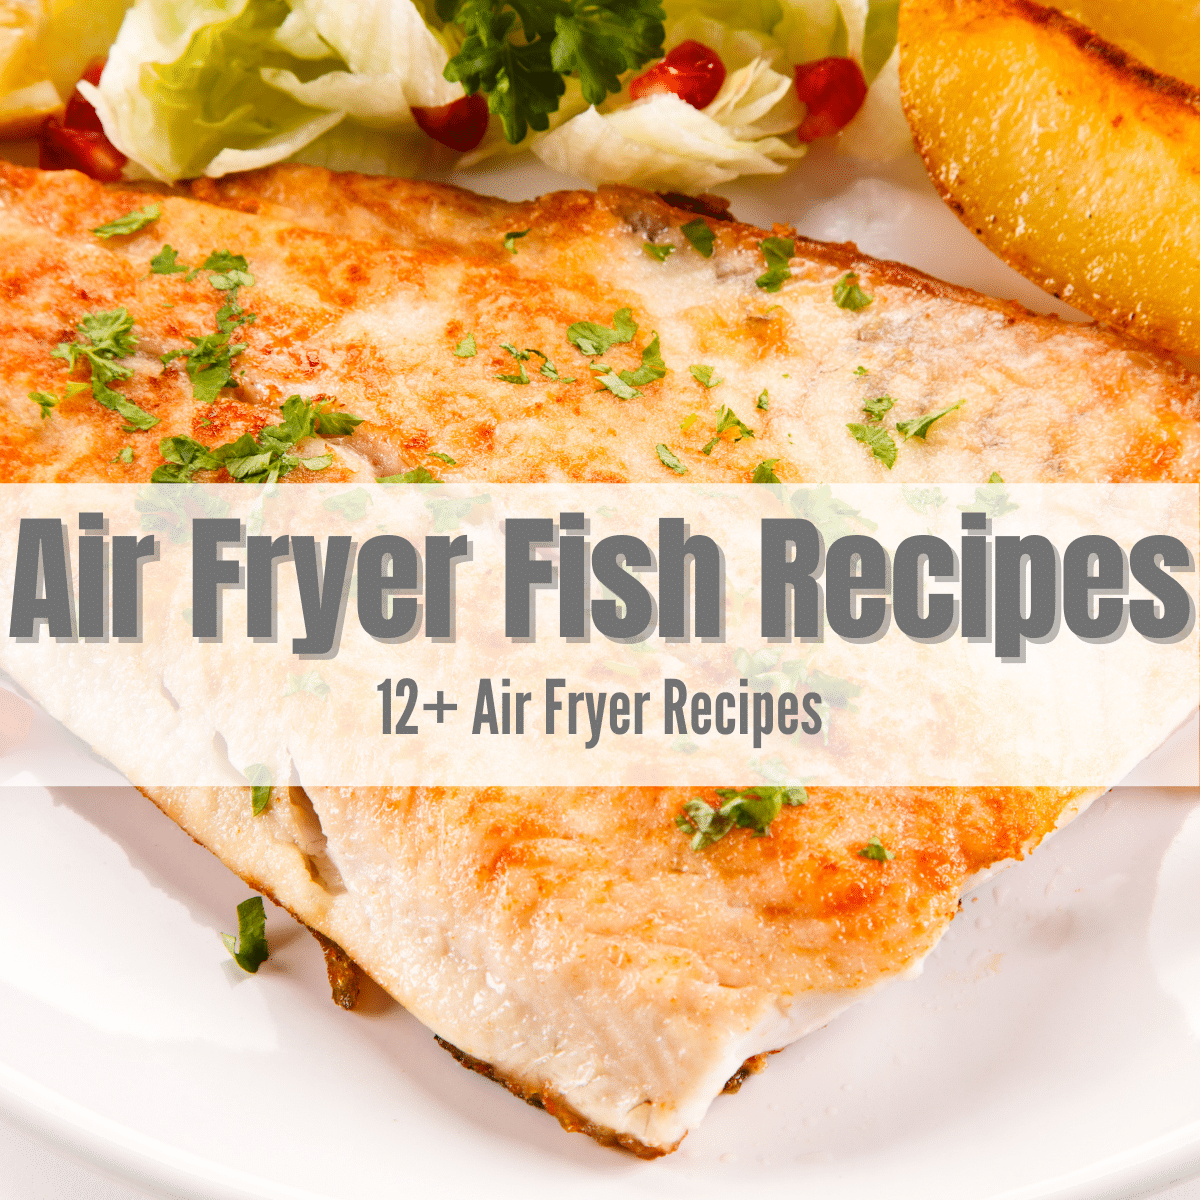 picture of cooked fish with some vegetables and text overlay: air fryer fish recipes